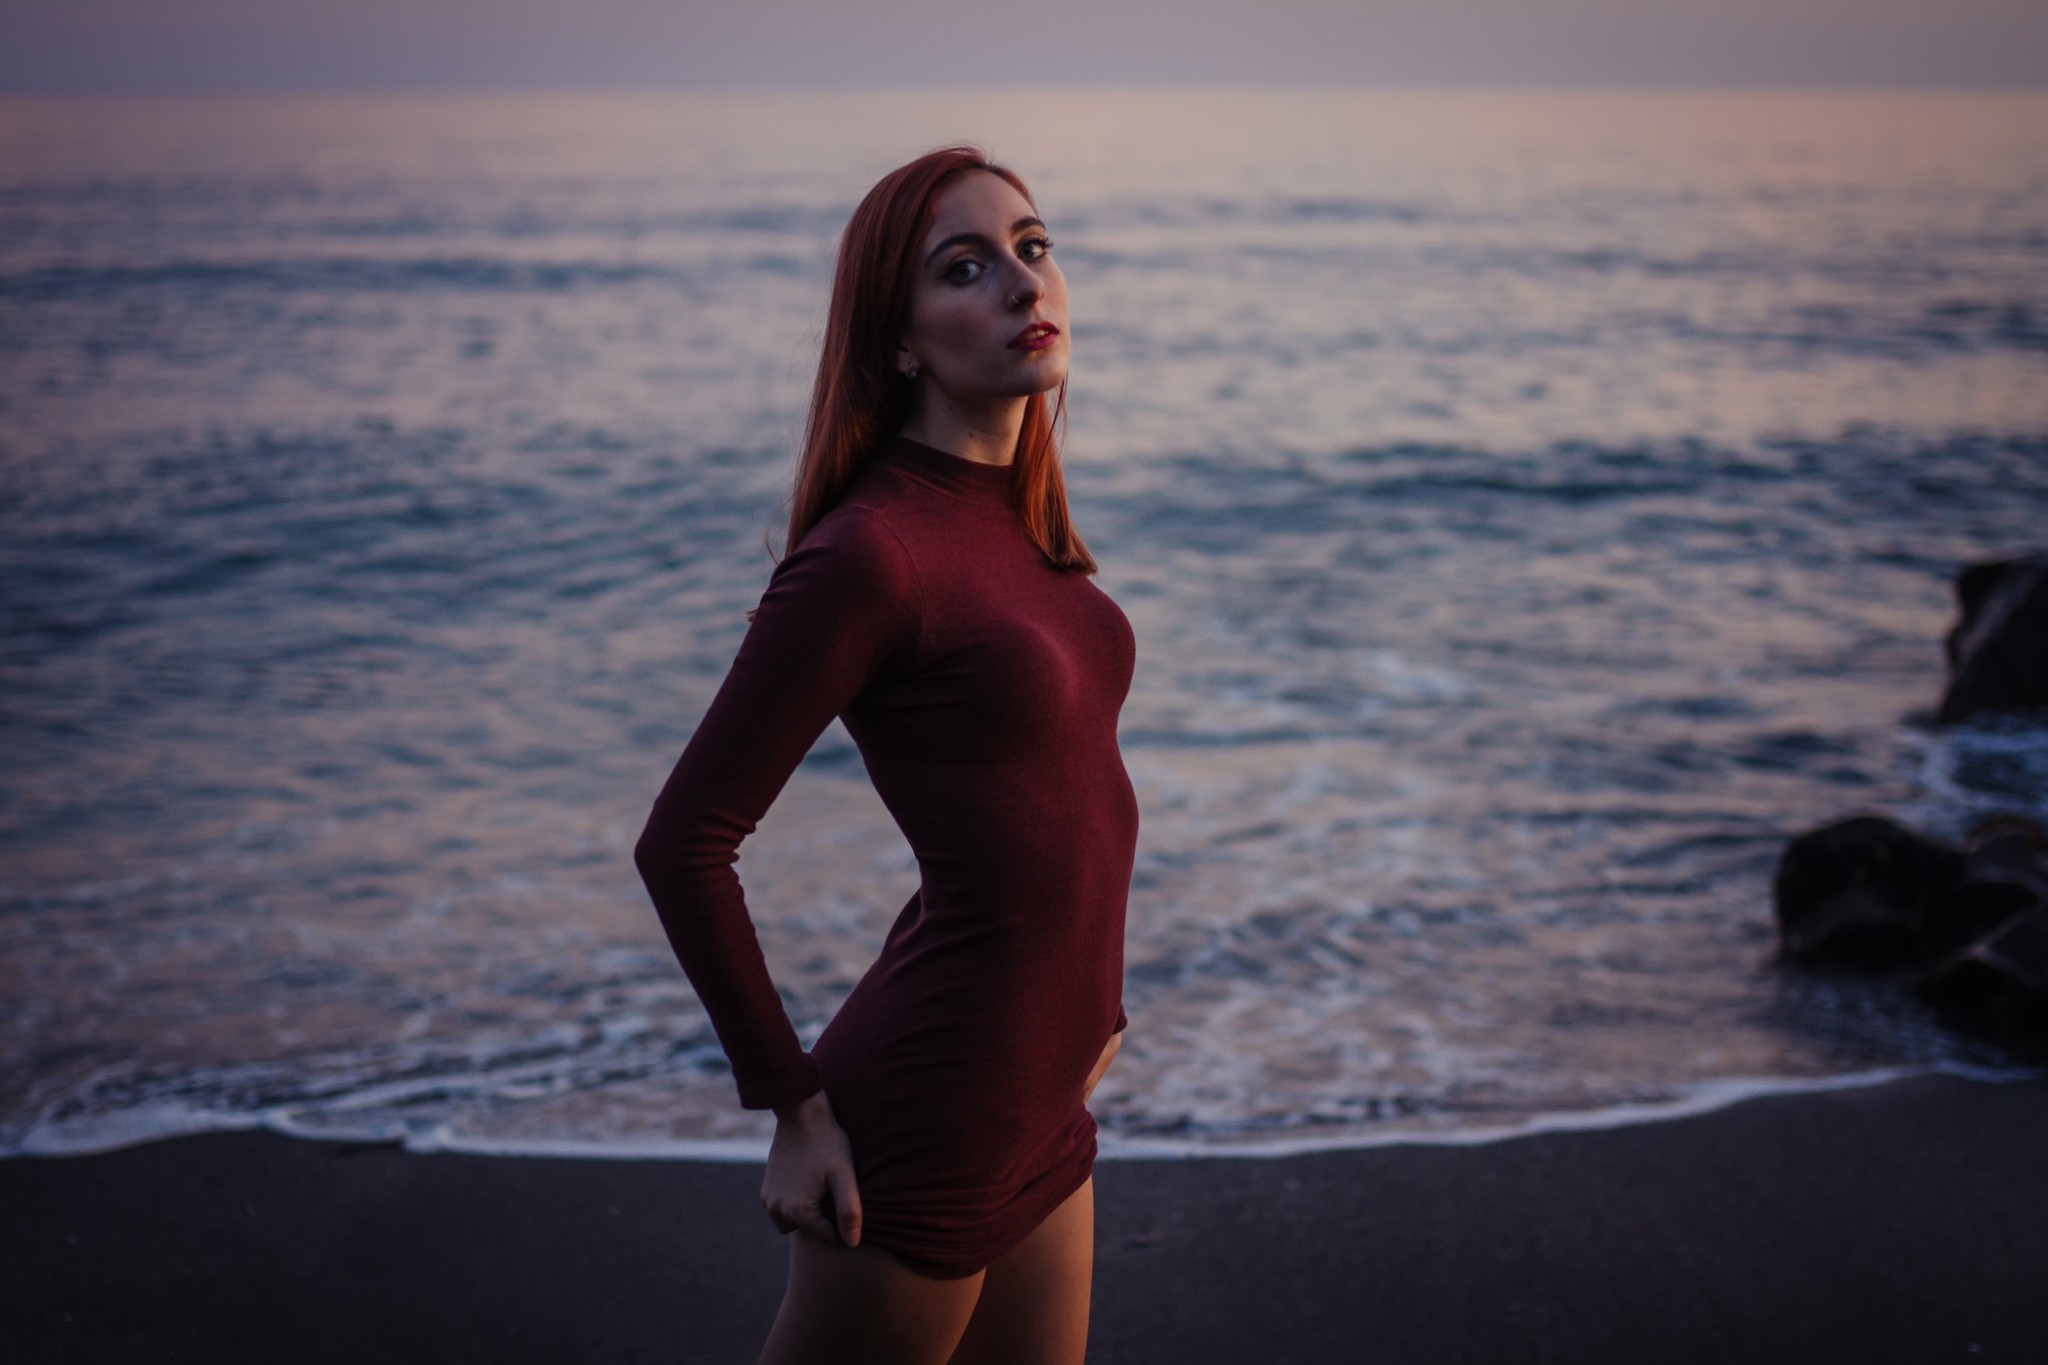 People 2048x1365 women portrait sea sand redhead Daniel Muñoz dress women on beach women outdoors beach outdoors water boobs slim body dyed hair red lipstick model standing looking at viewer red clothing red dress long hair